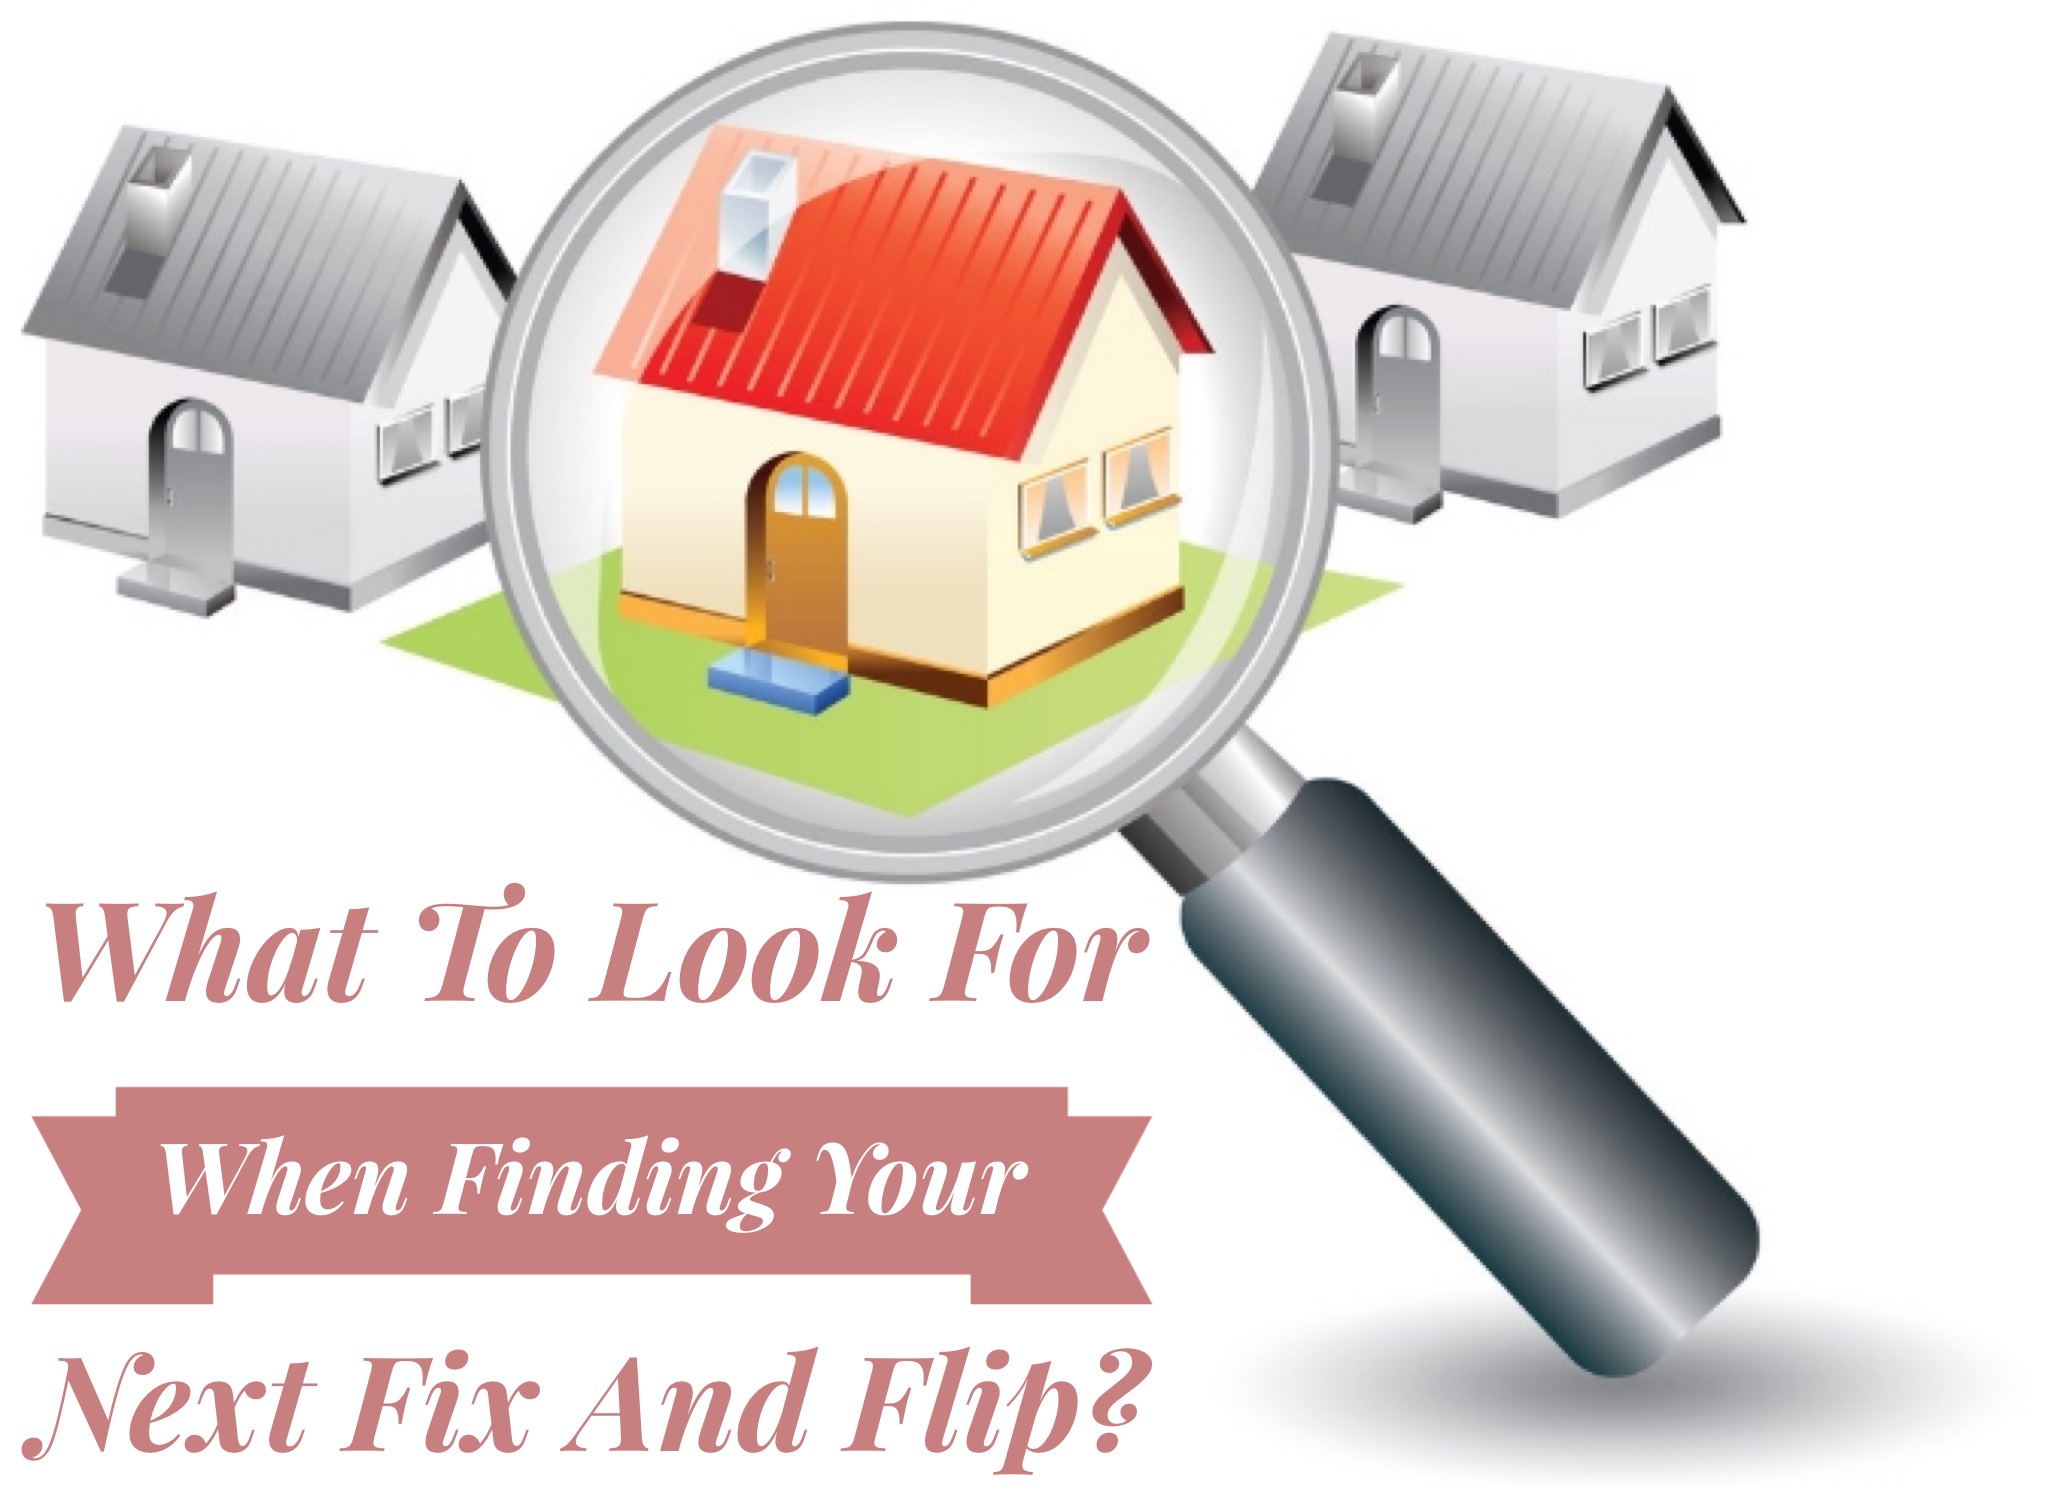 The Best Options to Fund Your Next Fix and Flip